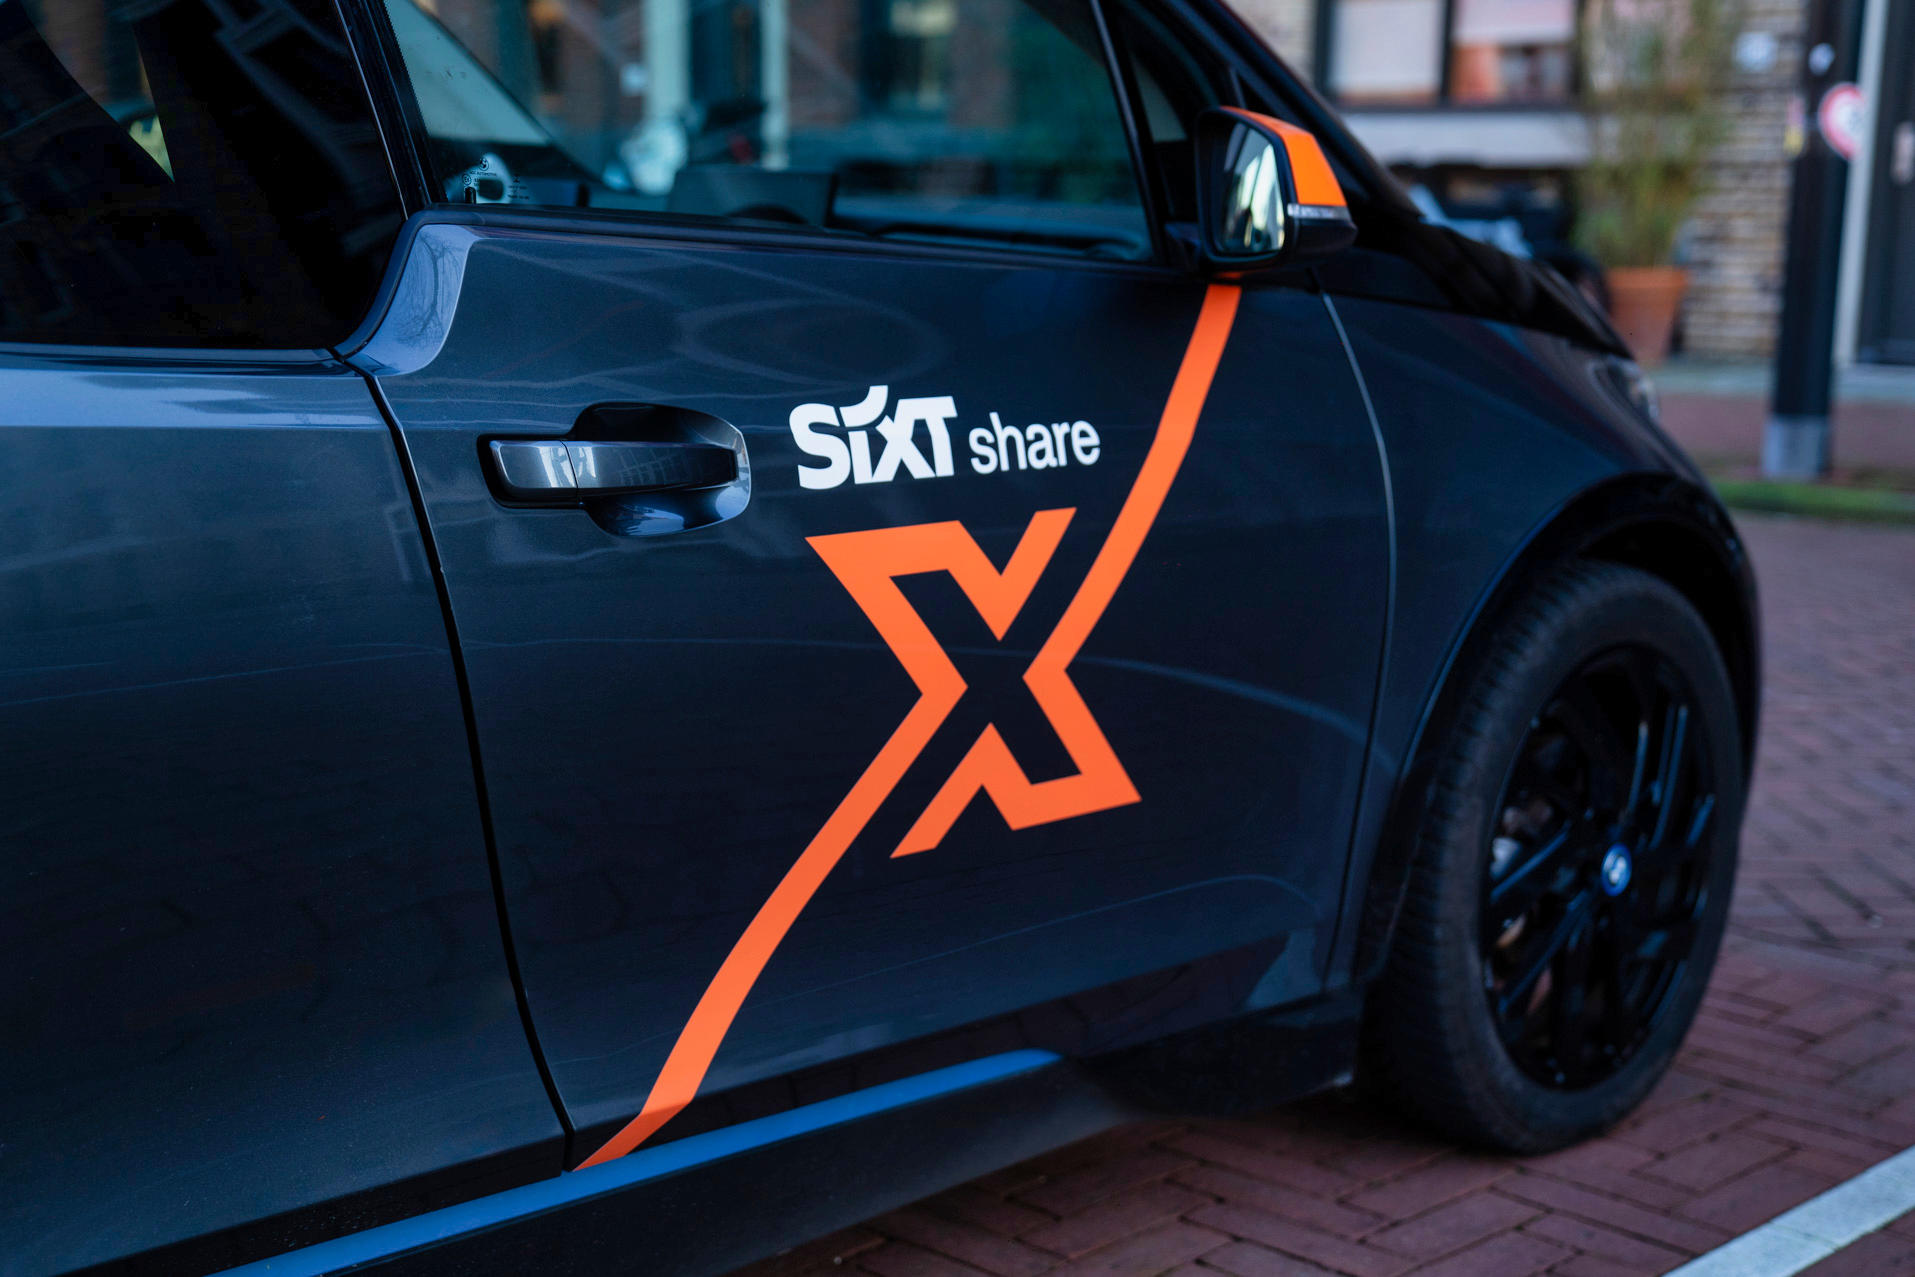 Foto's SIXT share Luchthaven Schiphol